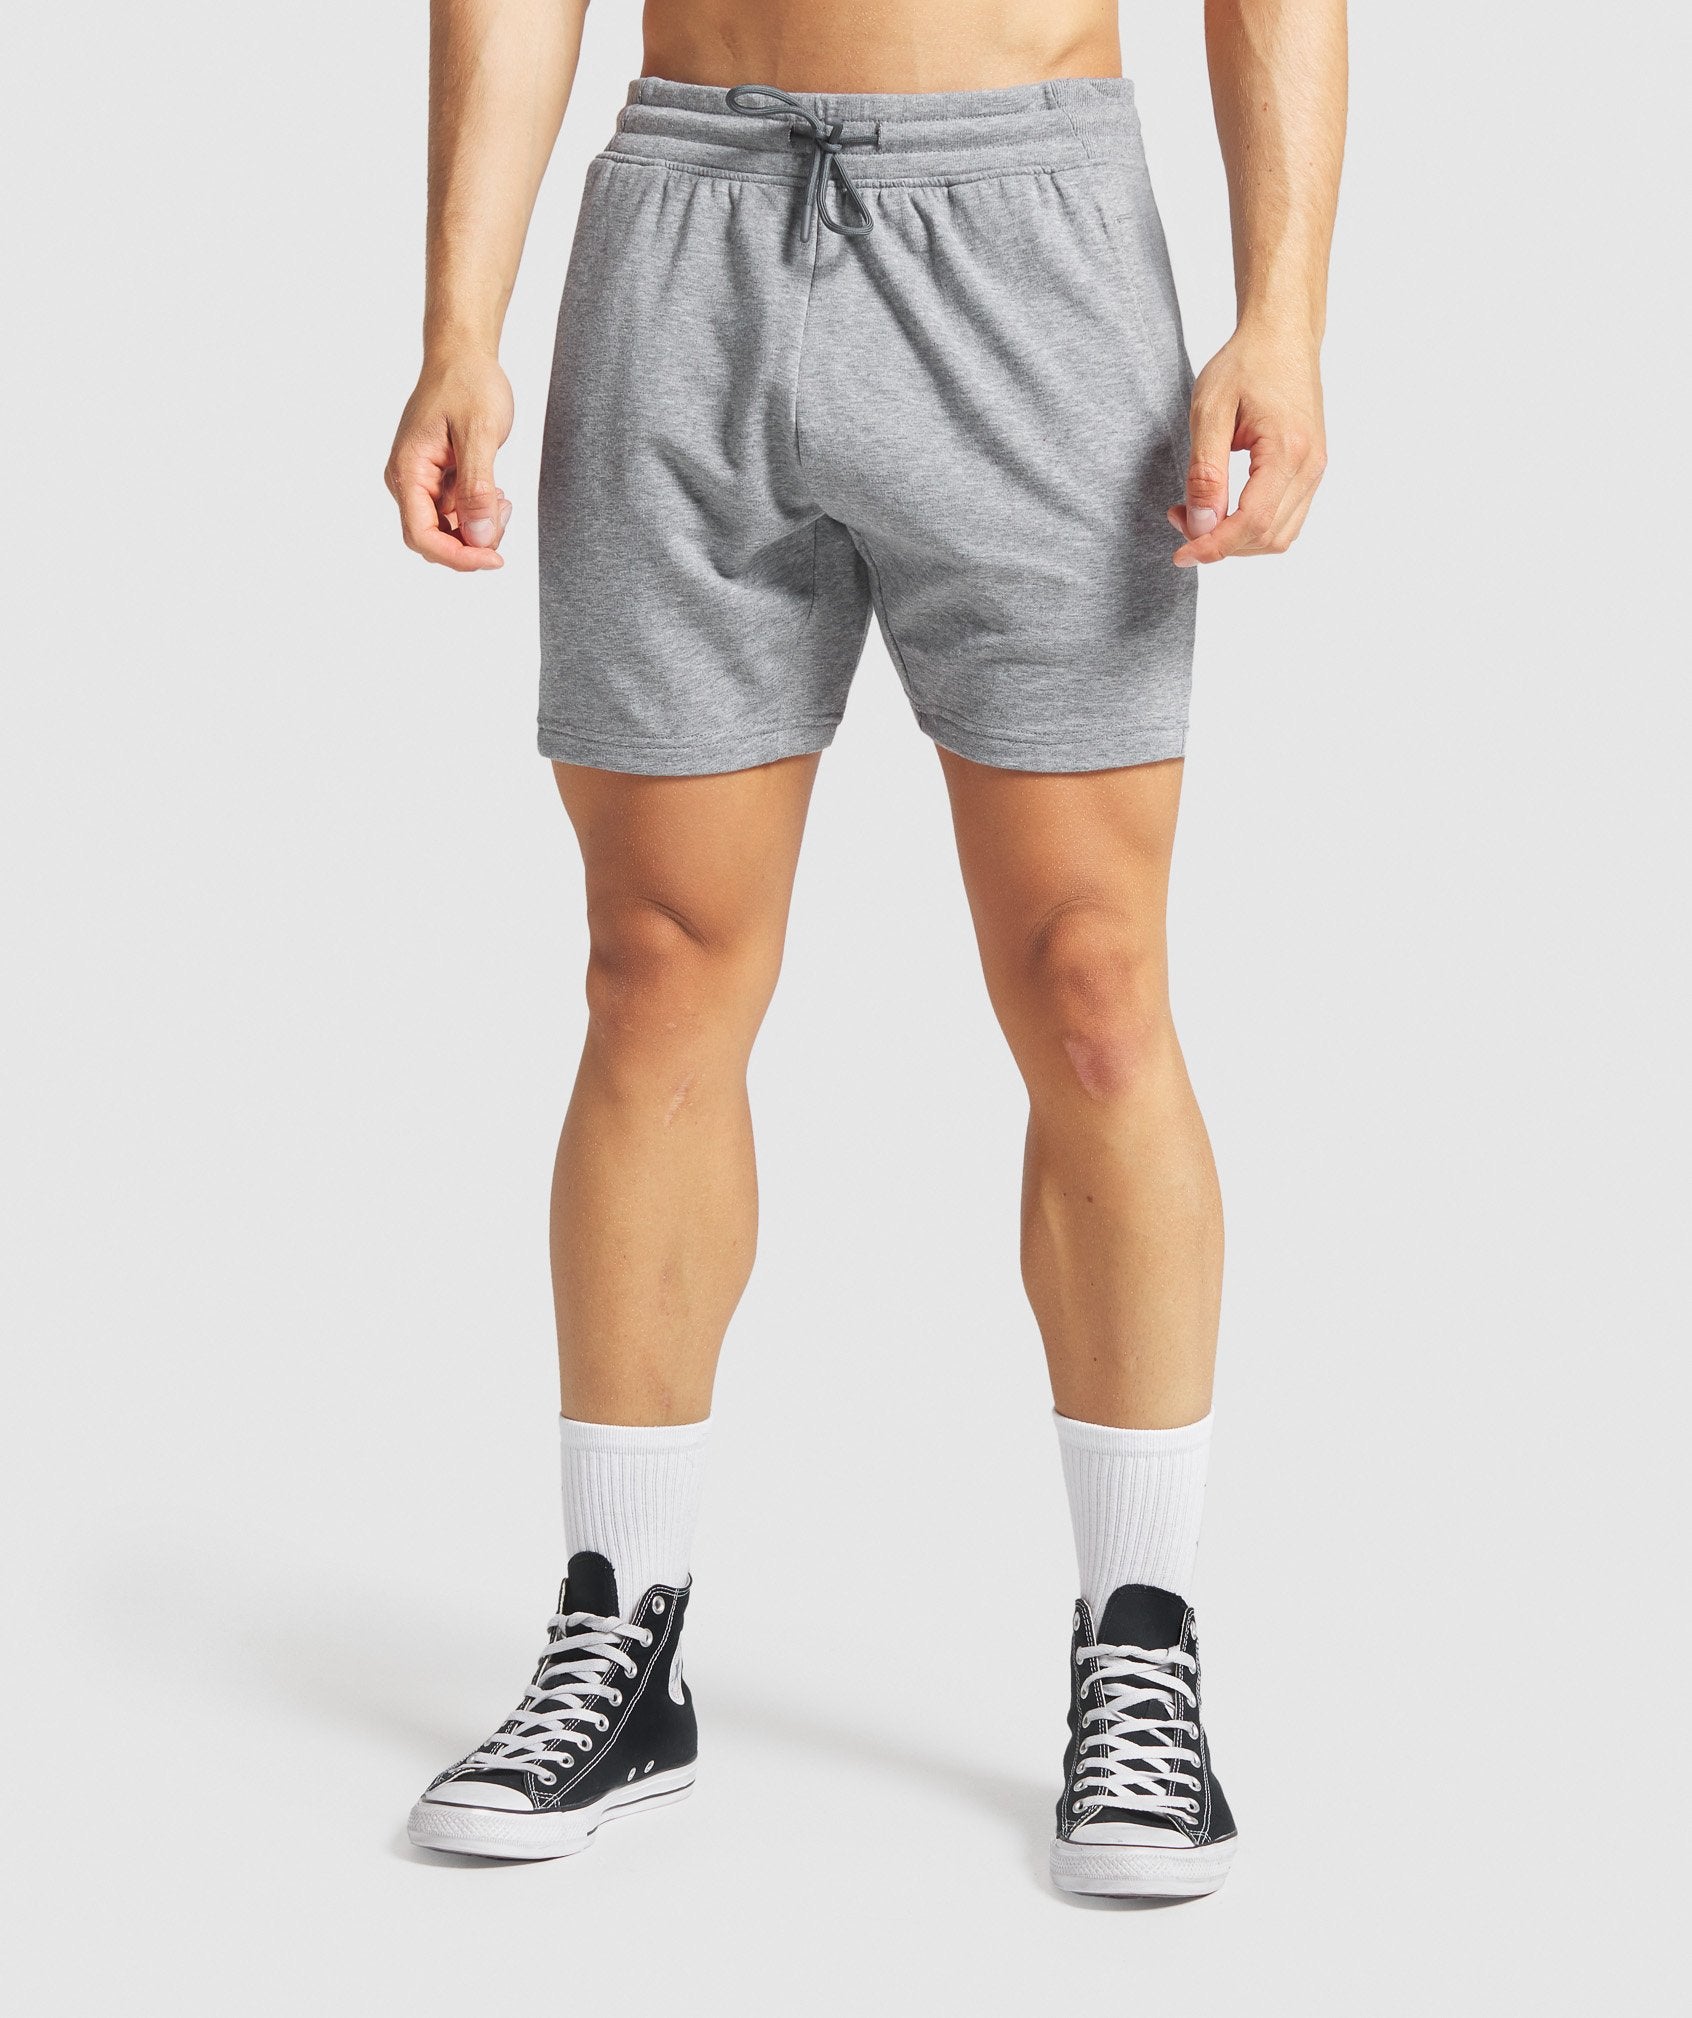 Bold Shorts in Charcoal Marl